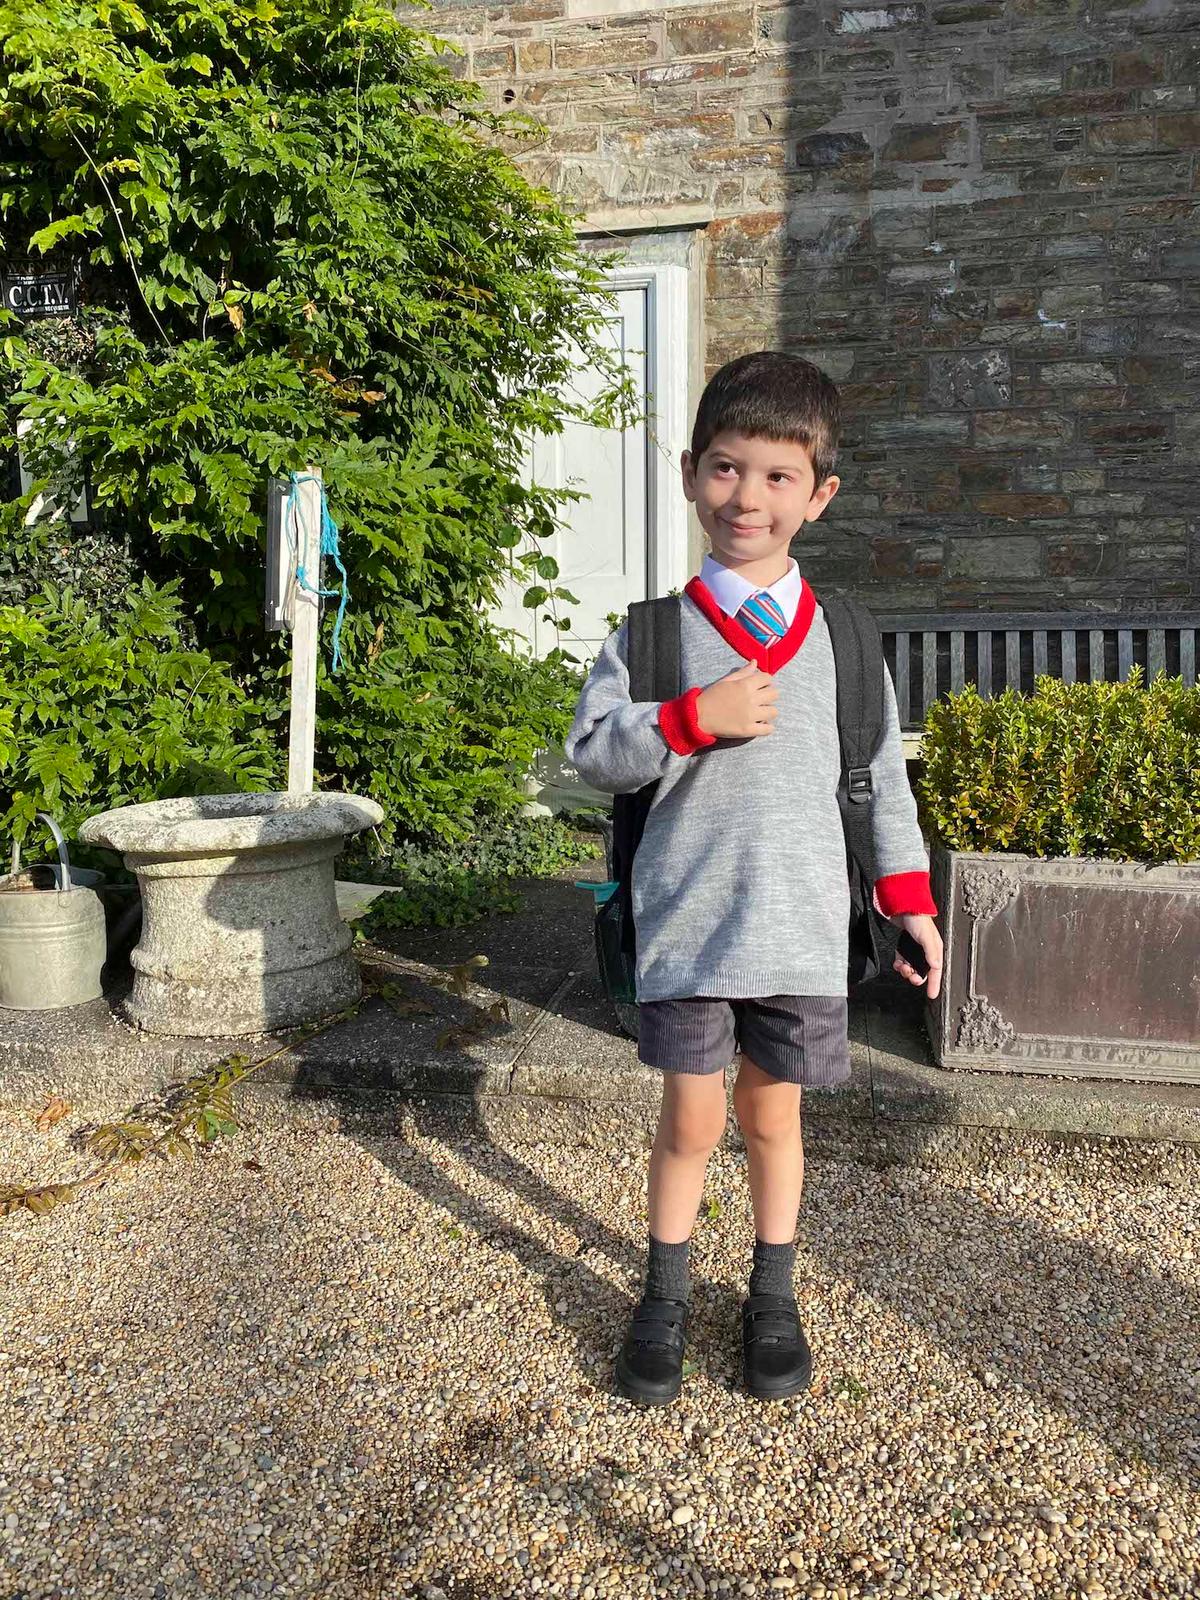 James started school on Sept. 7. (Caters News)